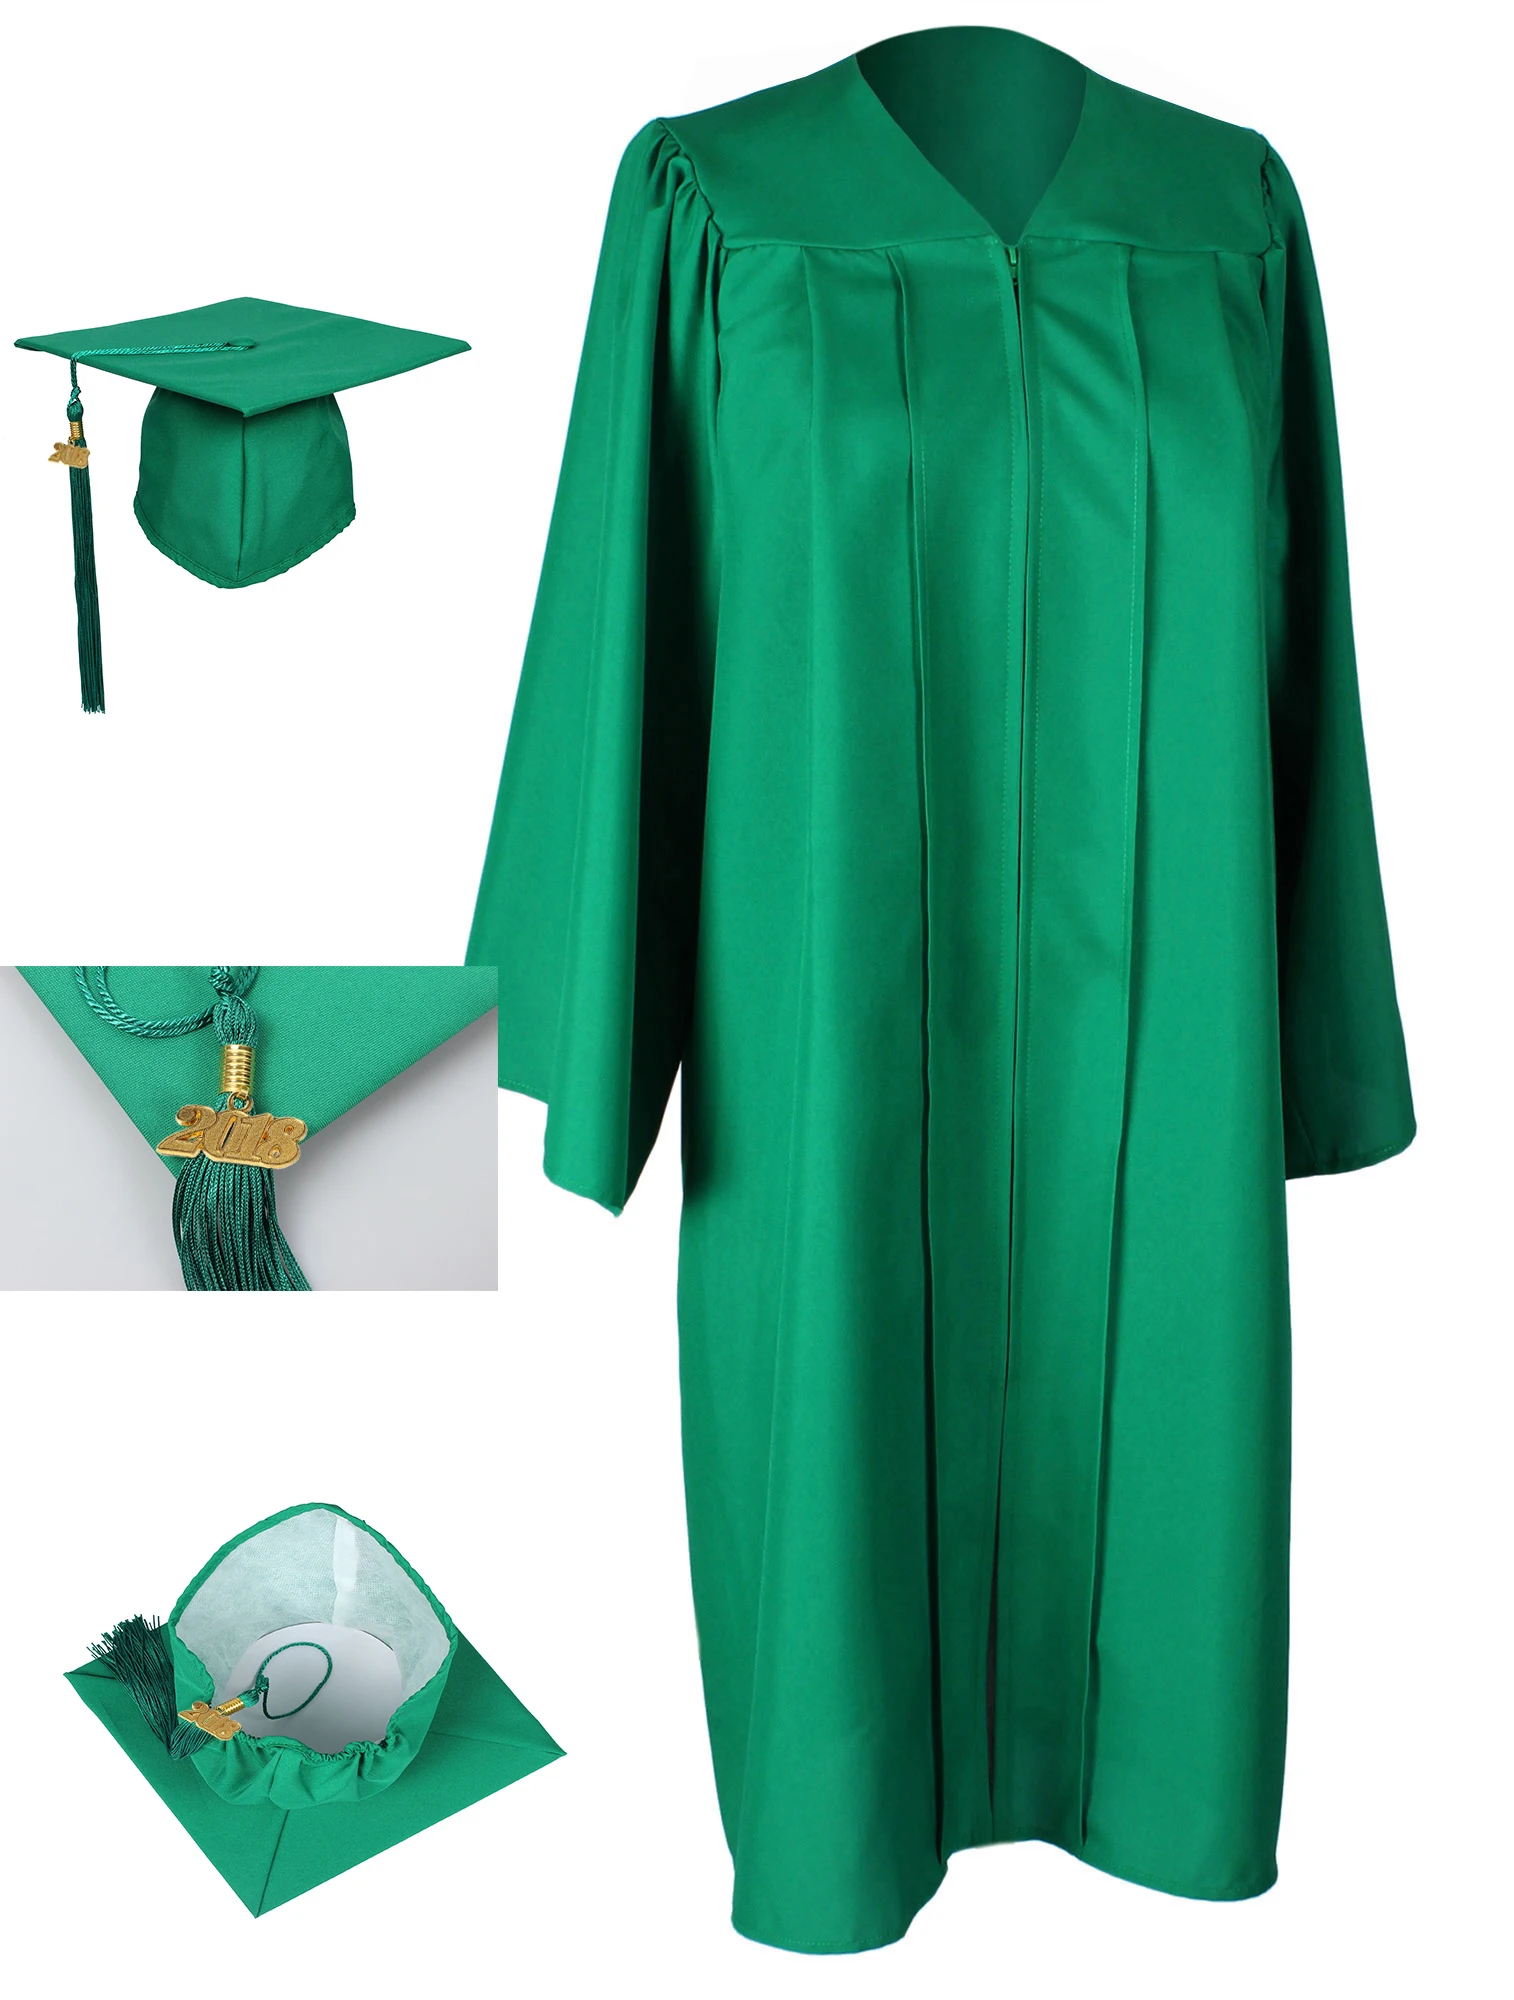 Unisex Adult Matte Finish Graduation Gown And Cap With Tassel Buy